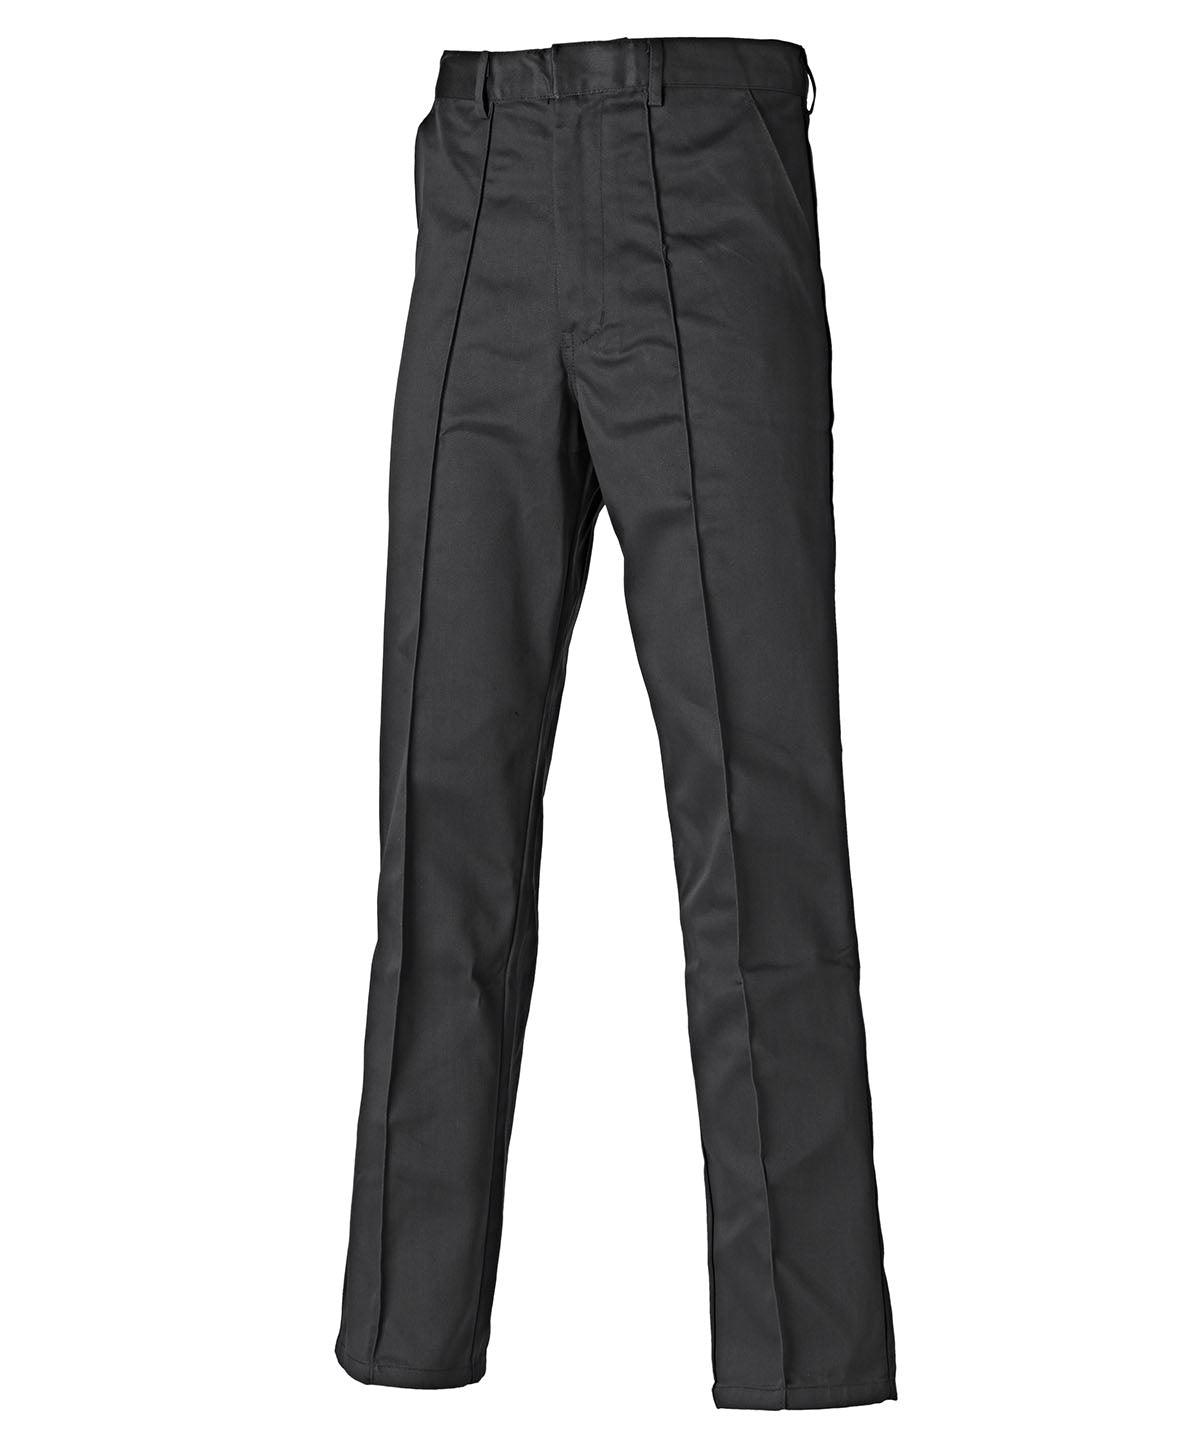 Black - Redhawk trousers (WD864) Trousers Last Chance to Buy Plus Sizes, Trousers & Shorts, Workwear Schoolwear Centres